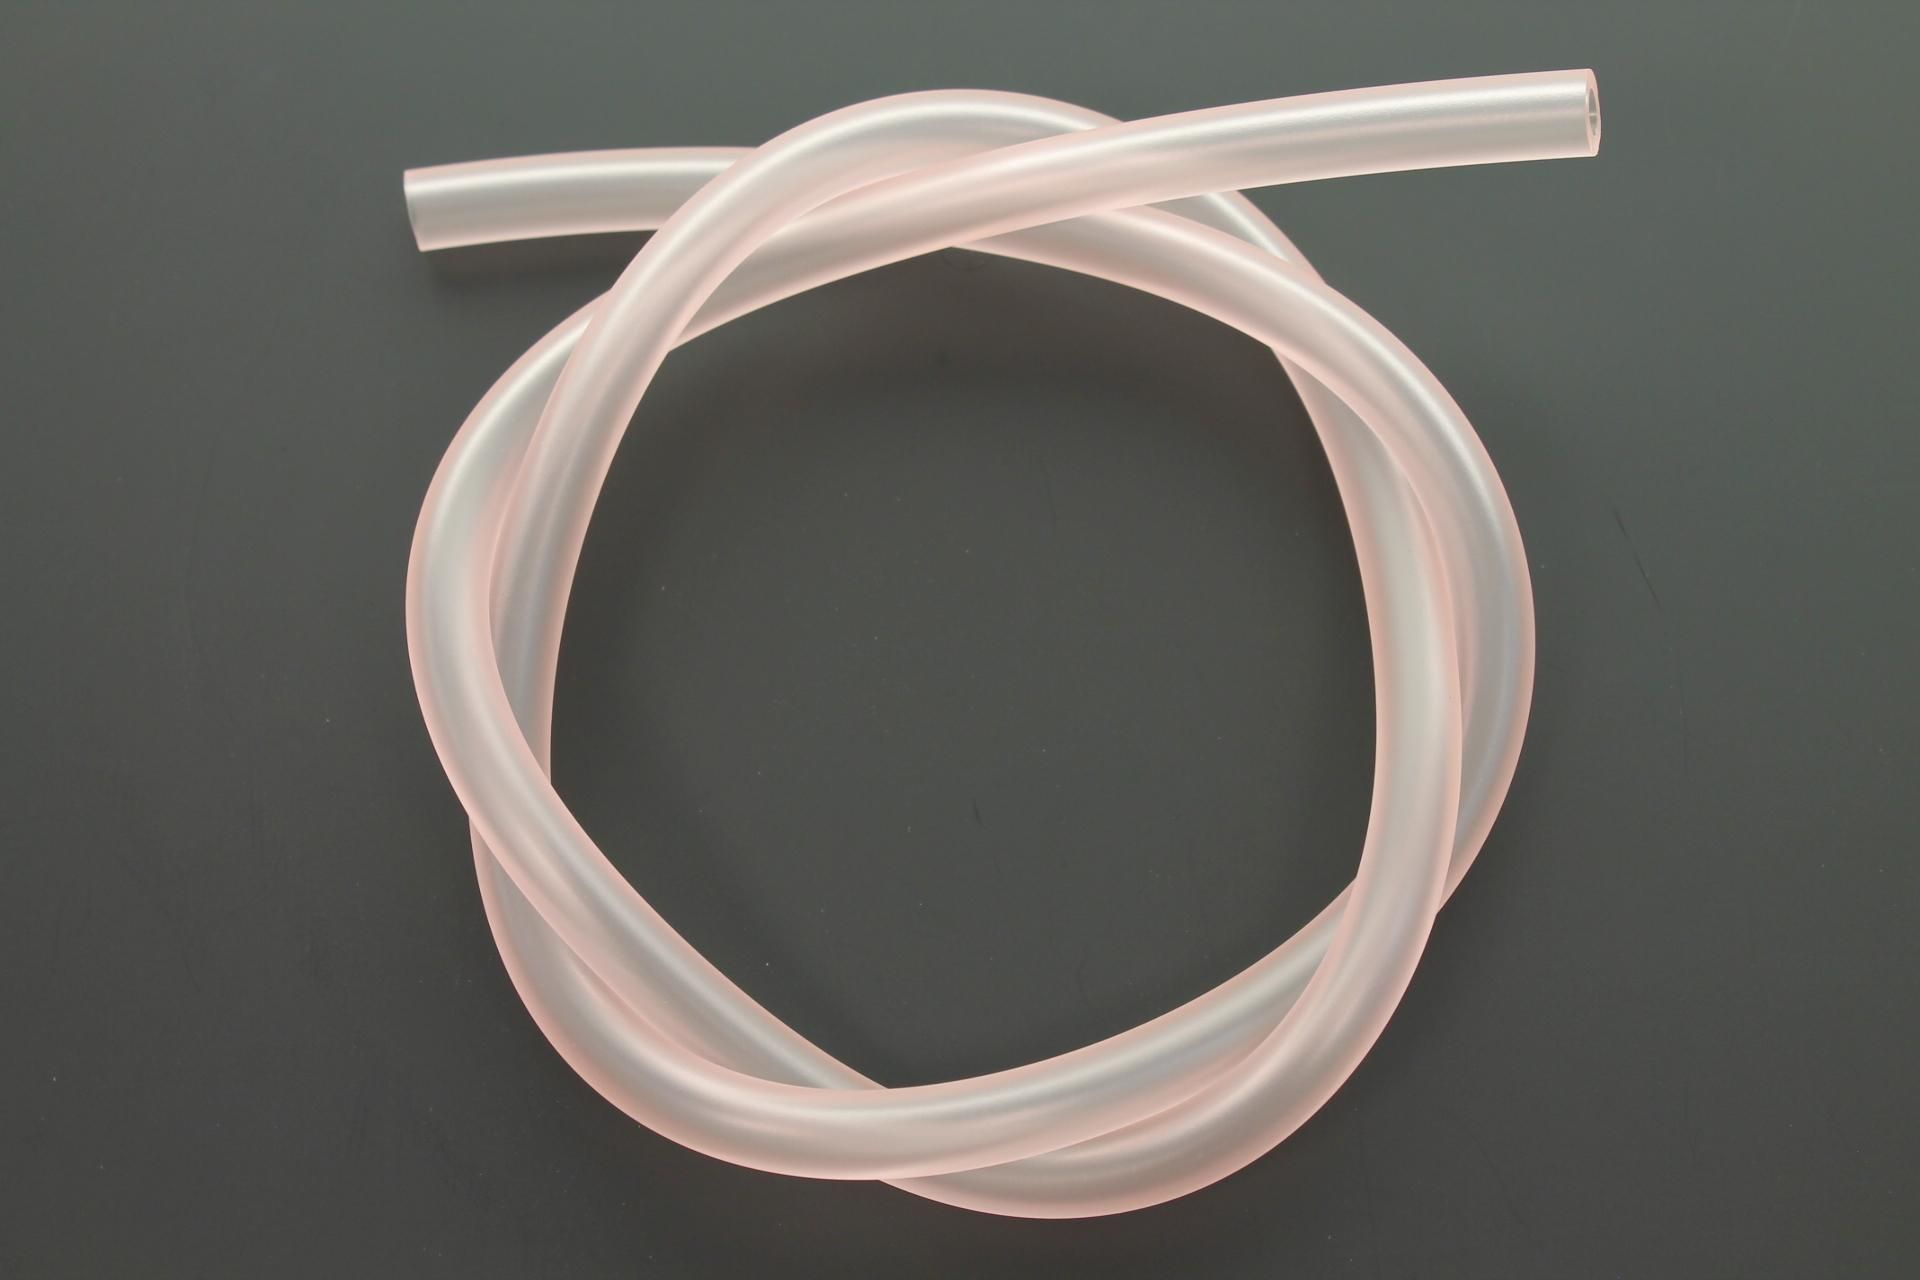 91A20-05052-00 Superseded by 91A20-05080-00 - TUBE, FLEXIBLE